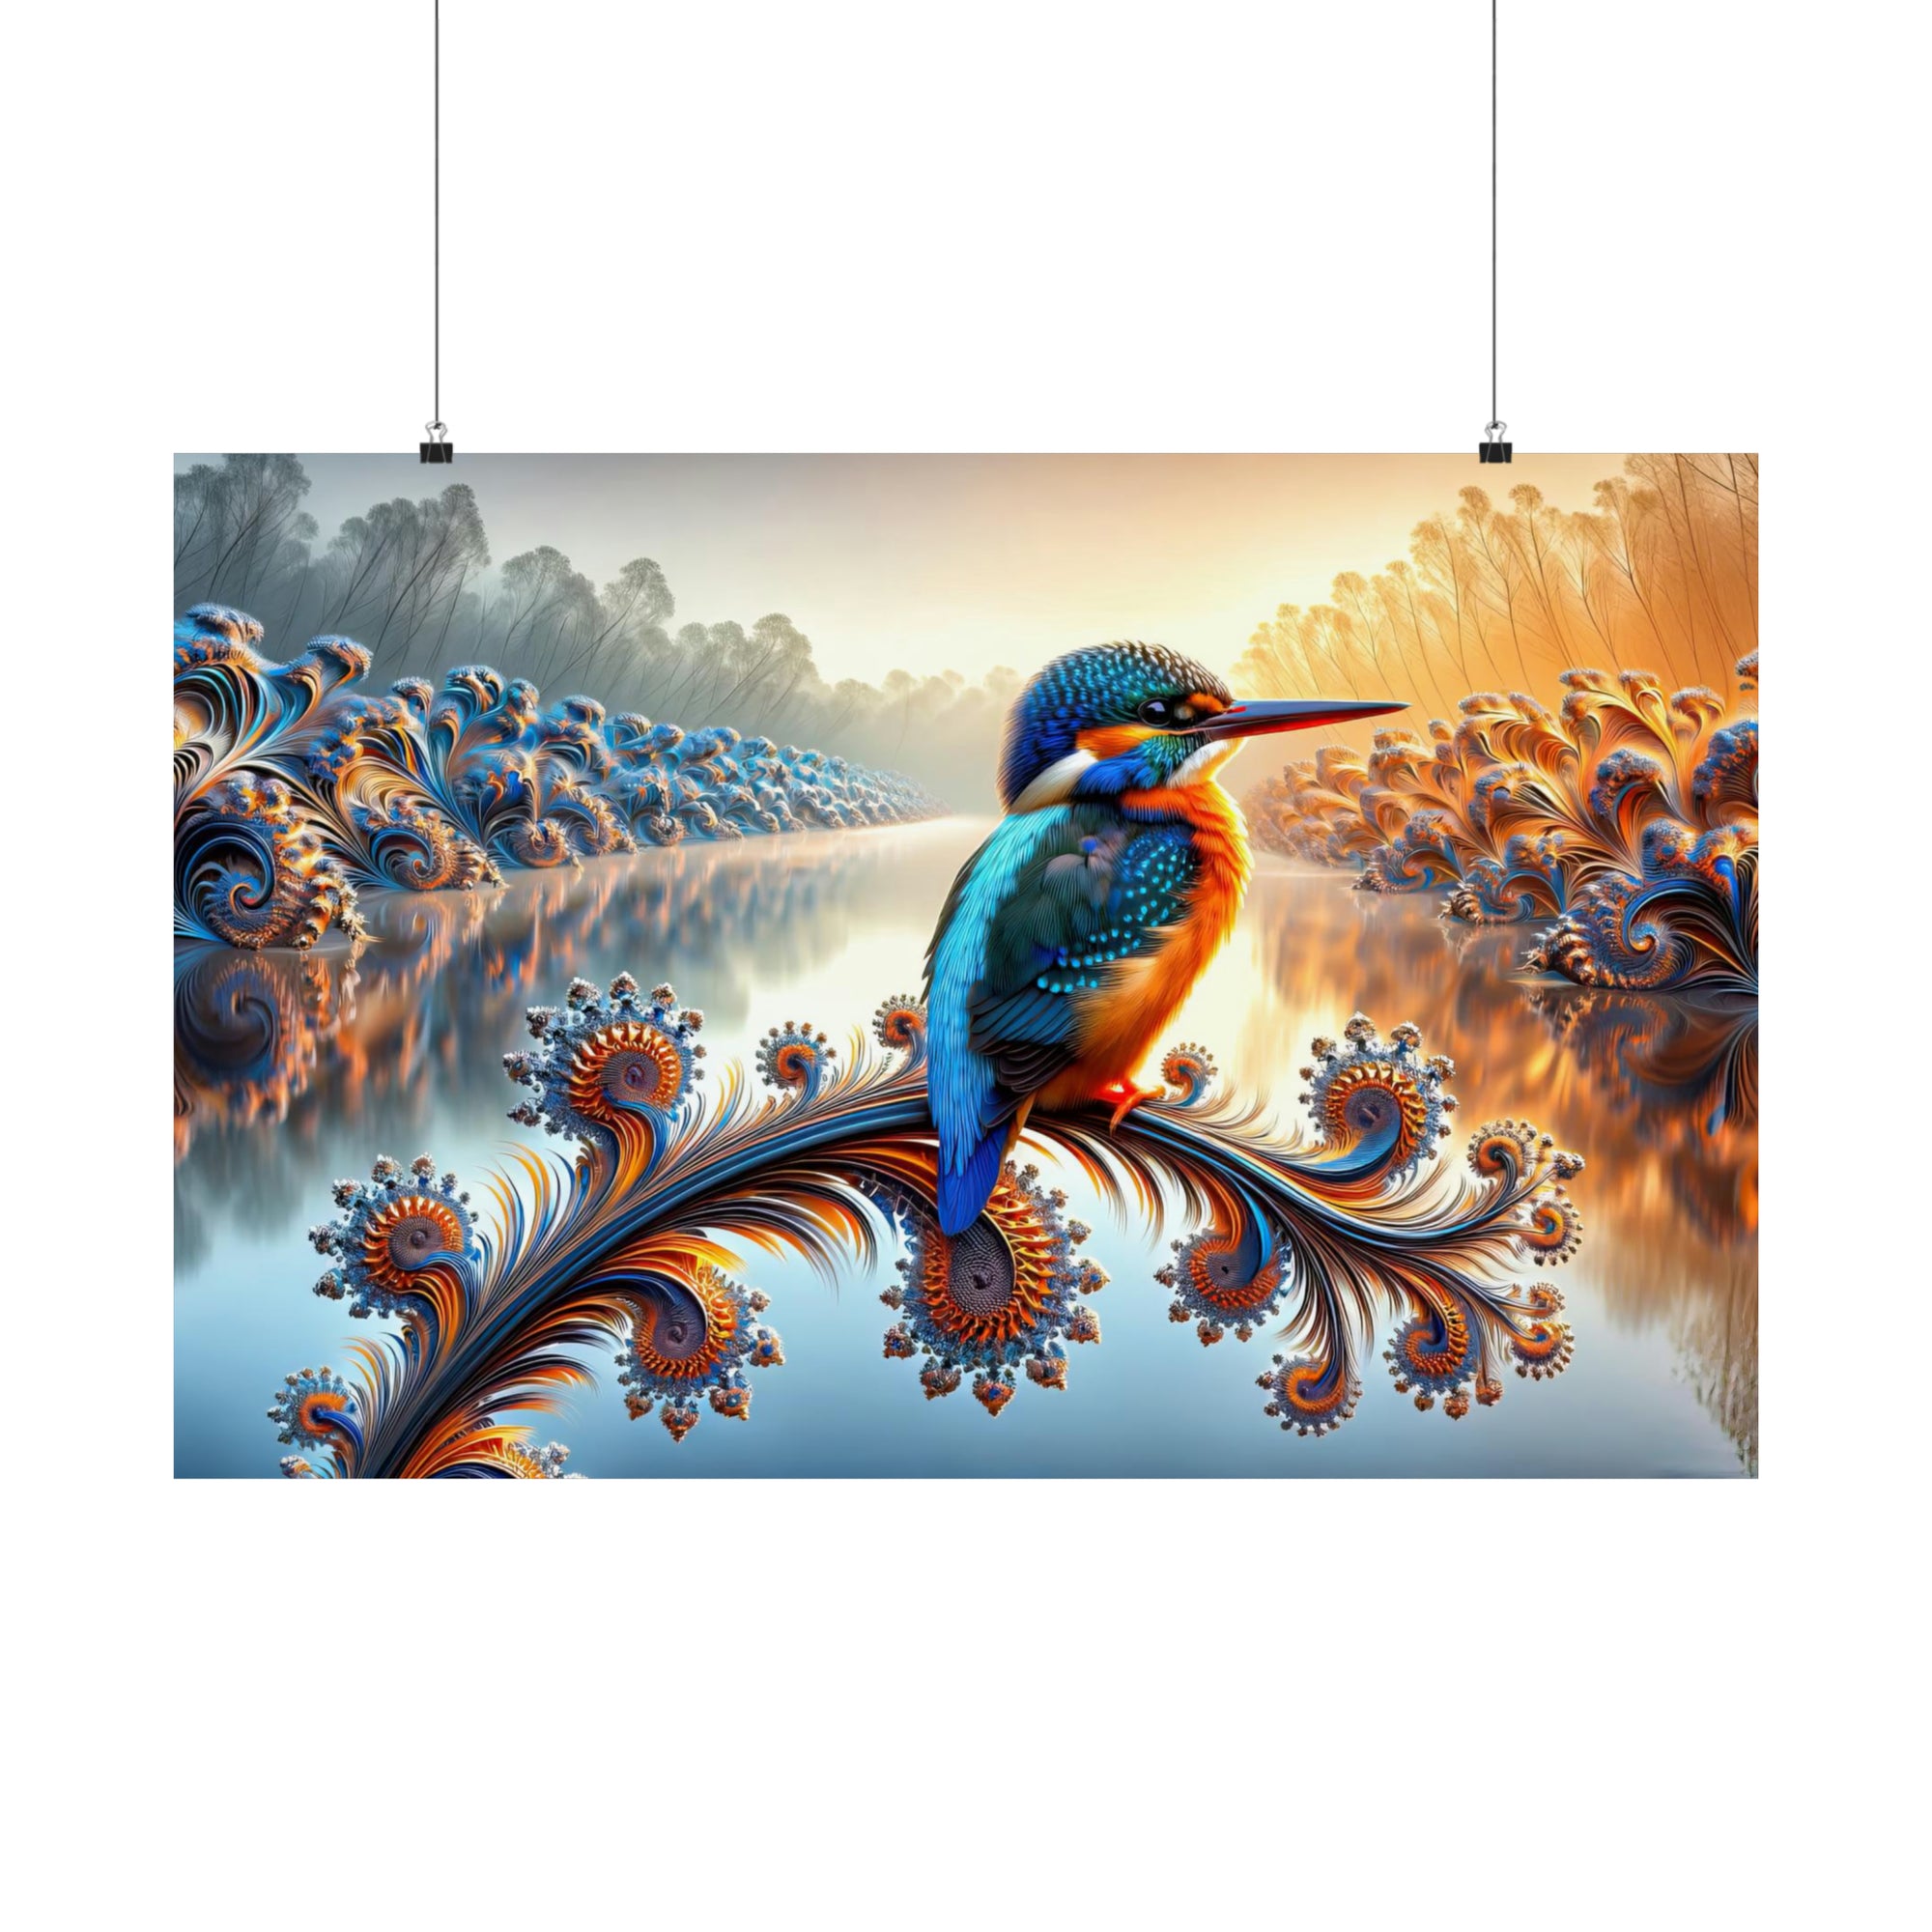 The Kingfisher's Perch Poster